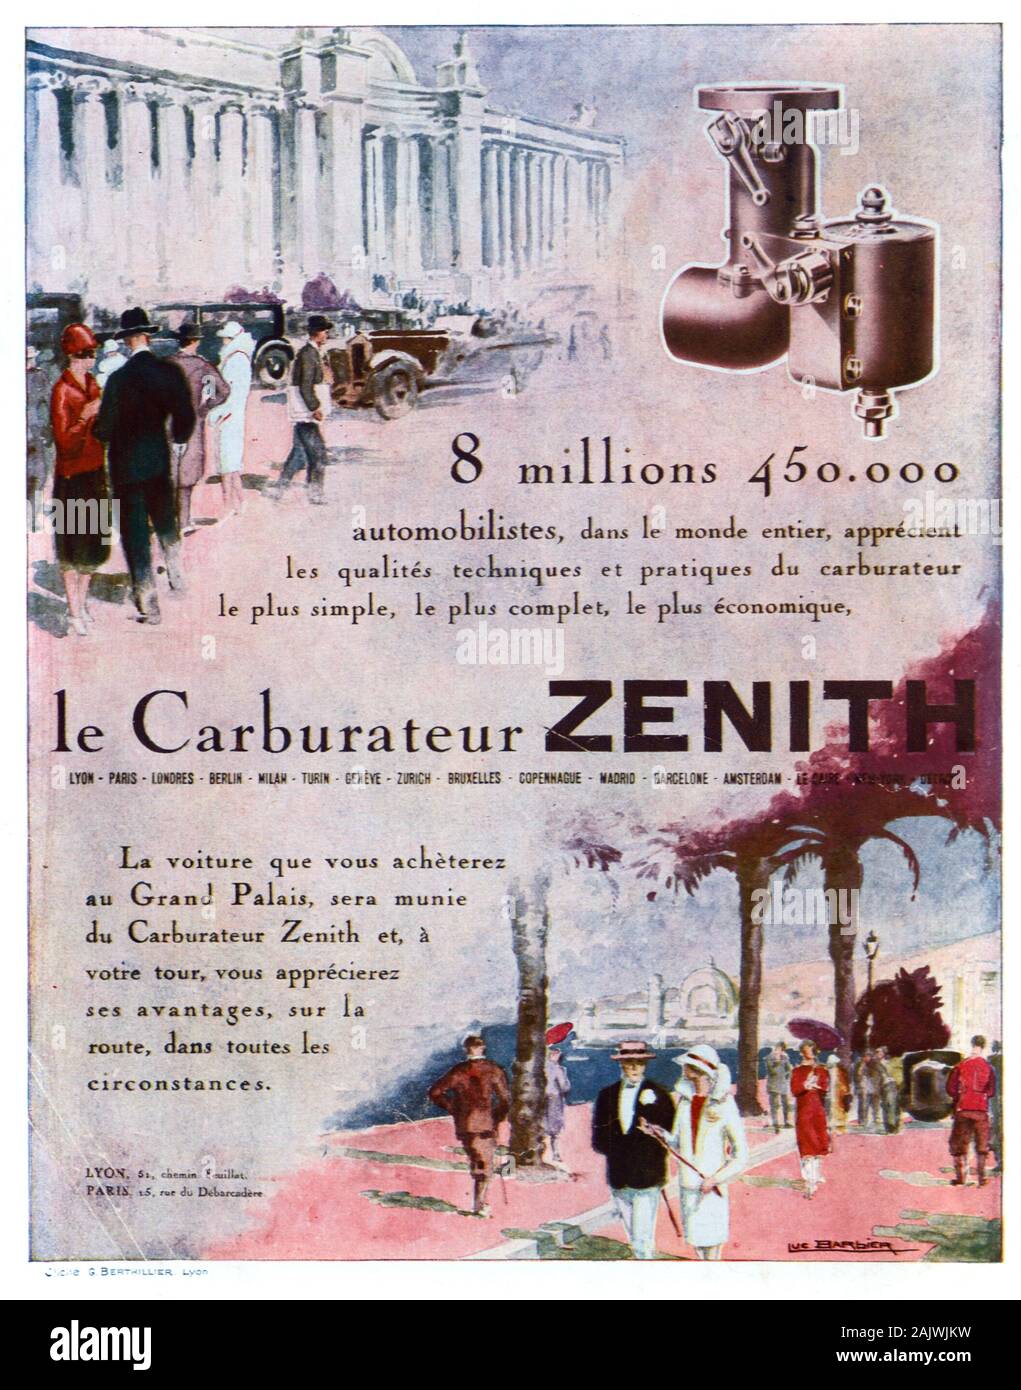 Old Advert for Zenith Carburetor Set in Belle Epoque Era in Nice France with the Promenade des Anglais, the Pier Jetty, and Art Deco Facade of the Palais de la Mediterranée or Casino Hotel, Alpes-Maritimes, Côte-d'Azur or French Riviera France. Advert 1927 Stock Photo